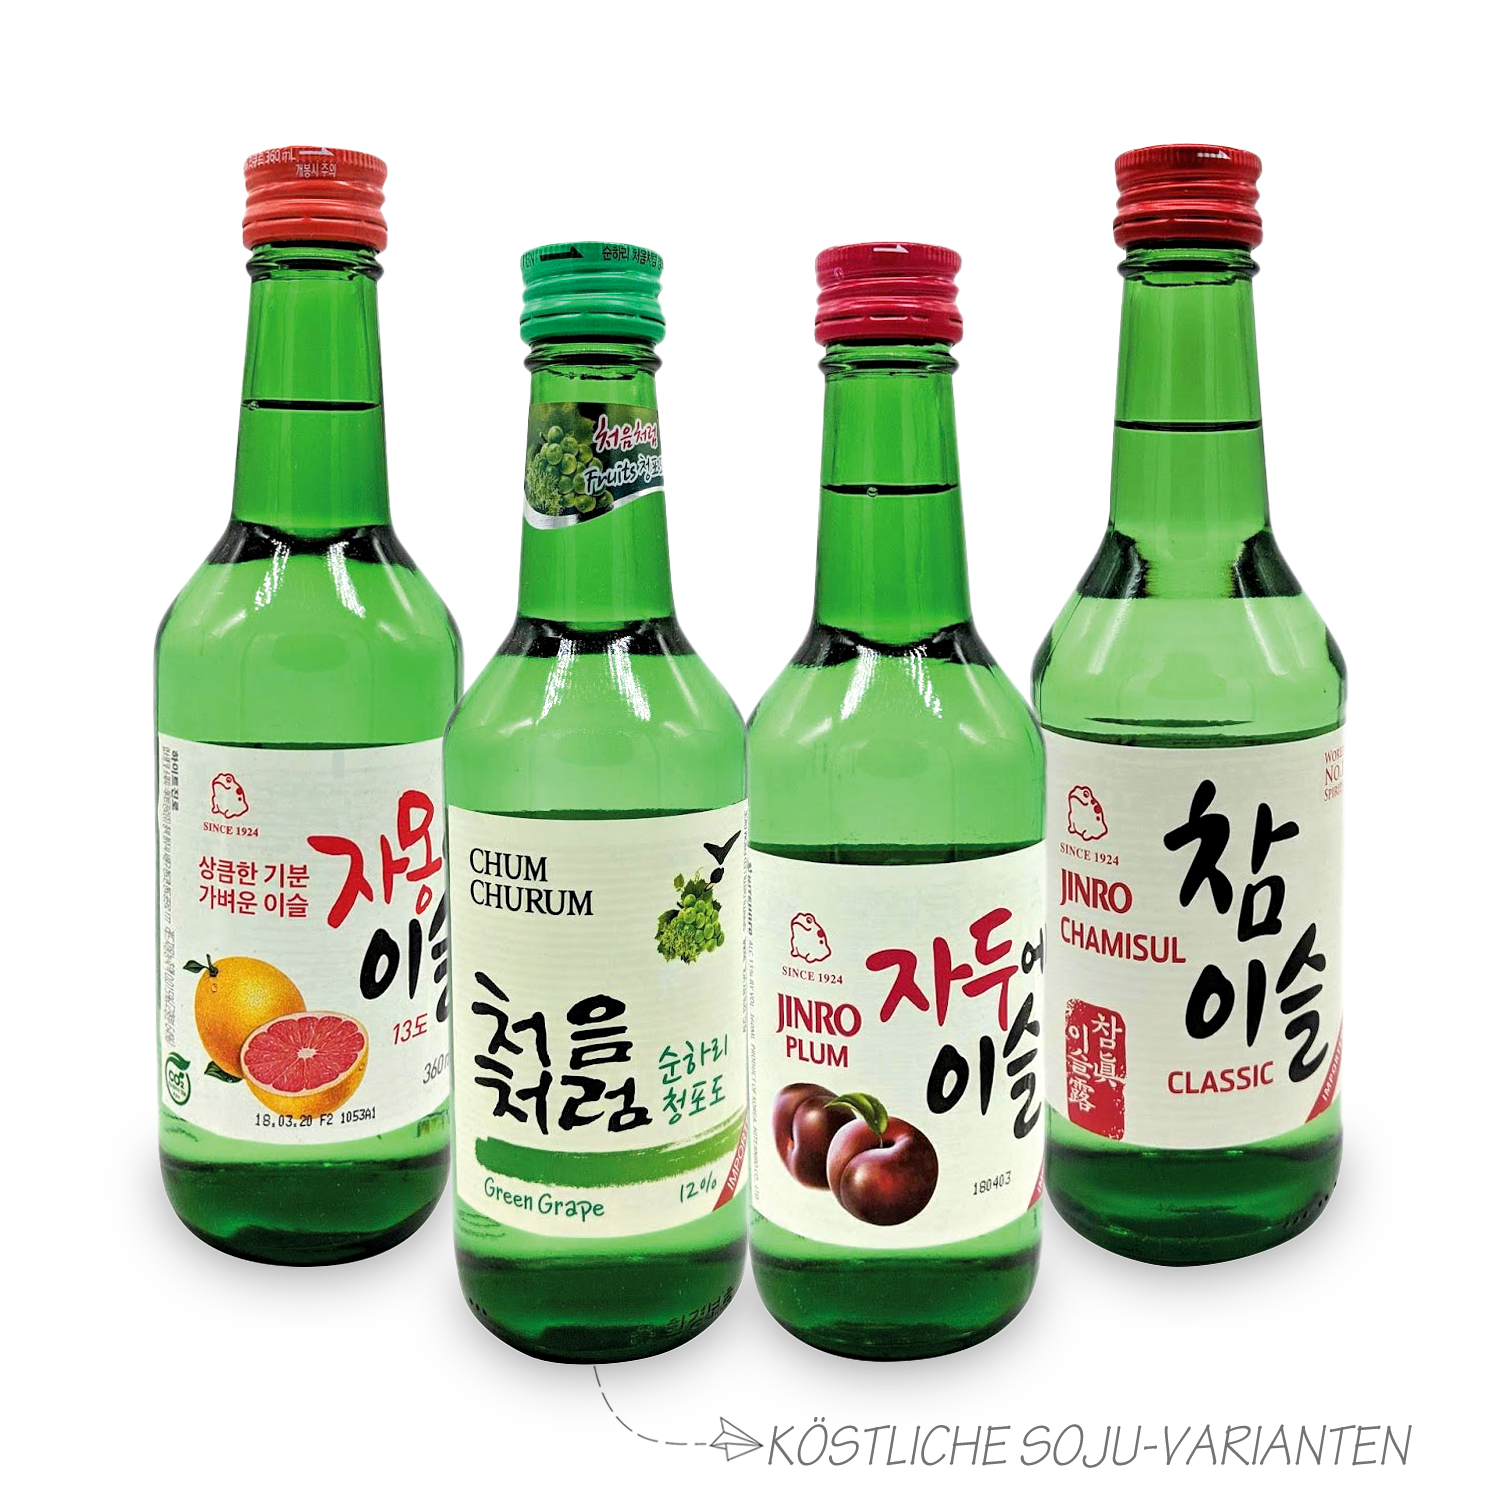 Sulsul: Surprise box with 6 alcoholic drinks from Korea